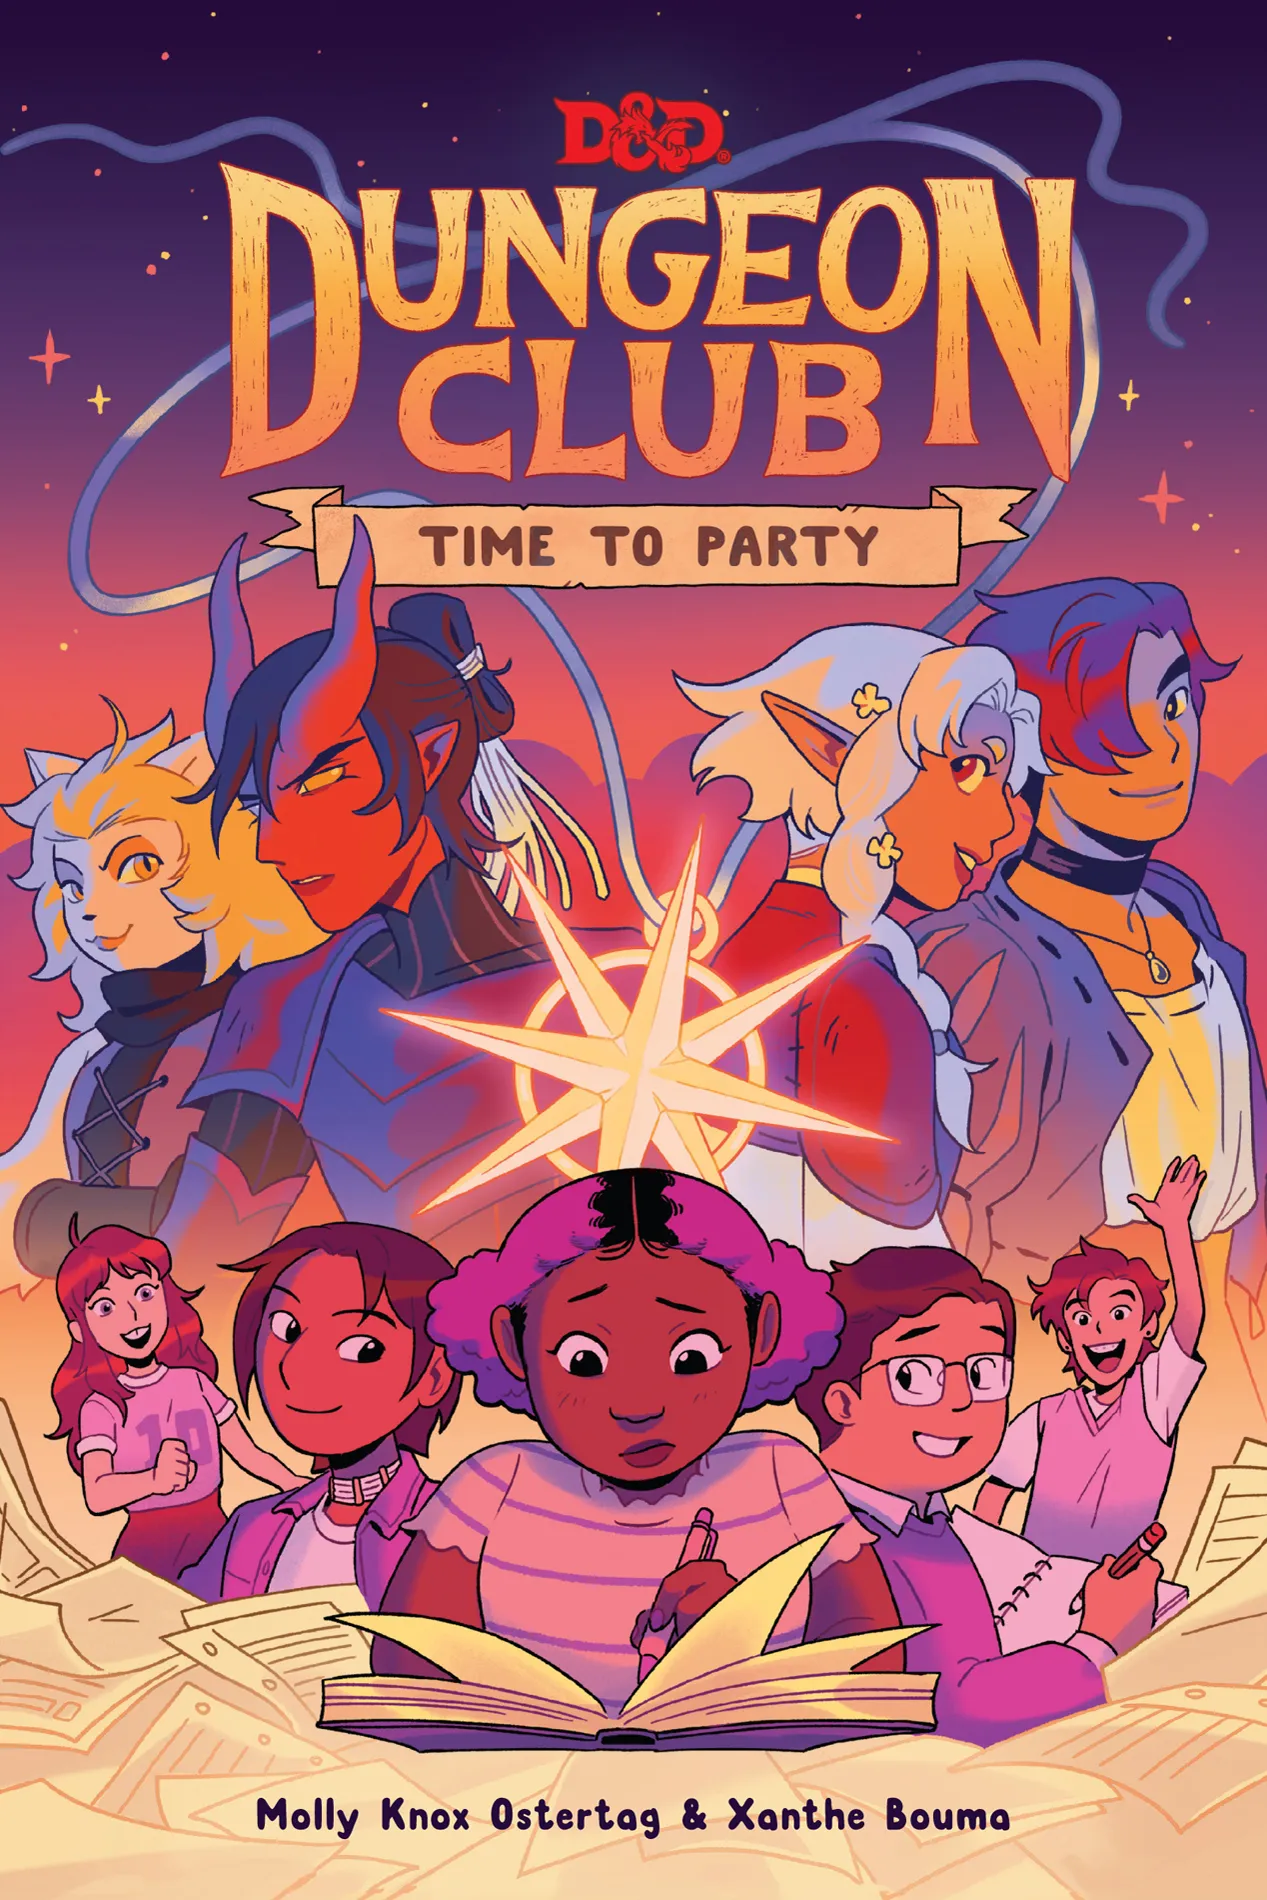 Time to Party (Dungeons & Dragons: Dungeon Club #2)